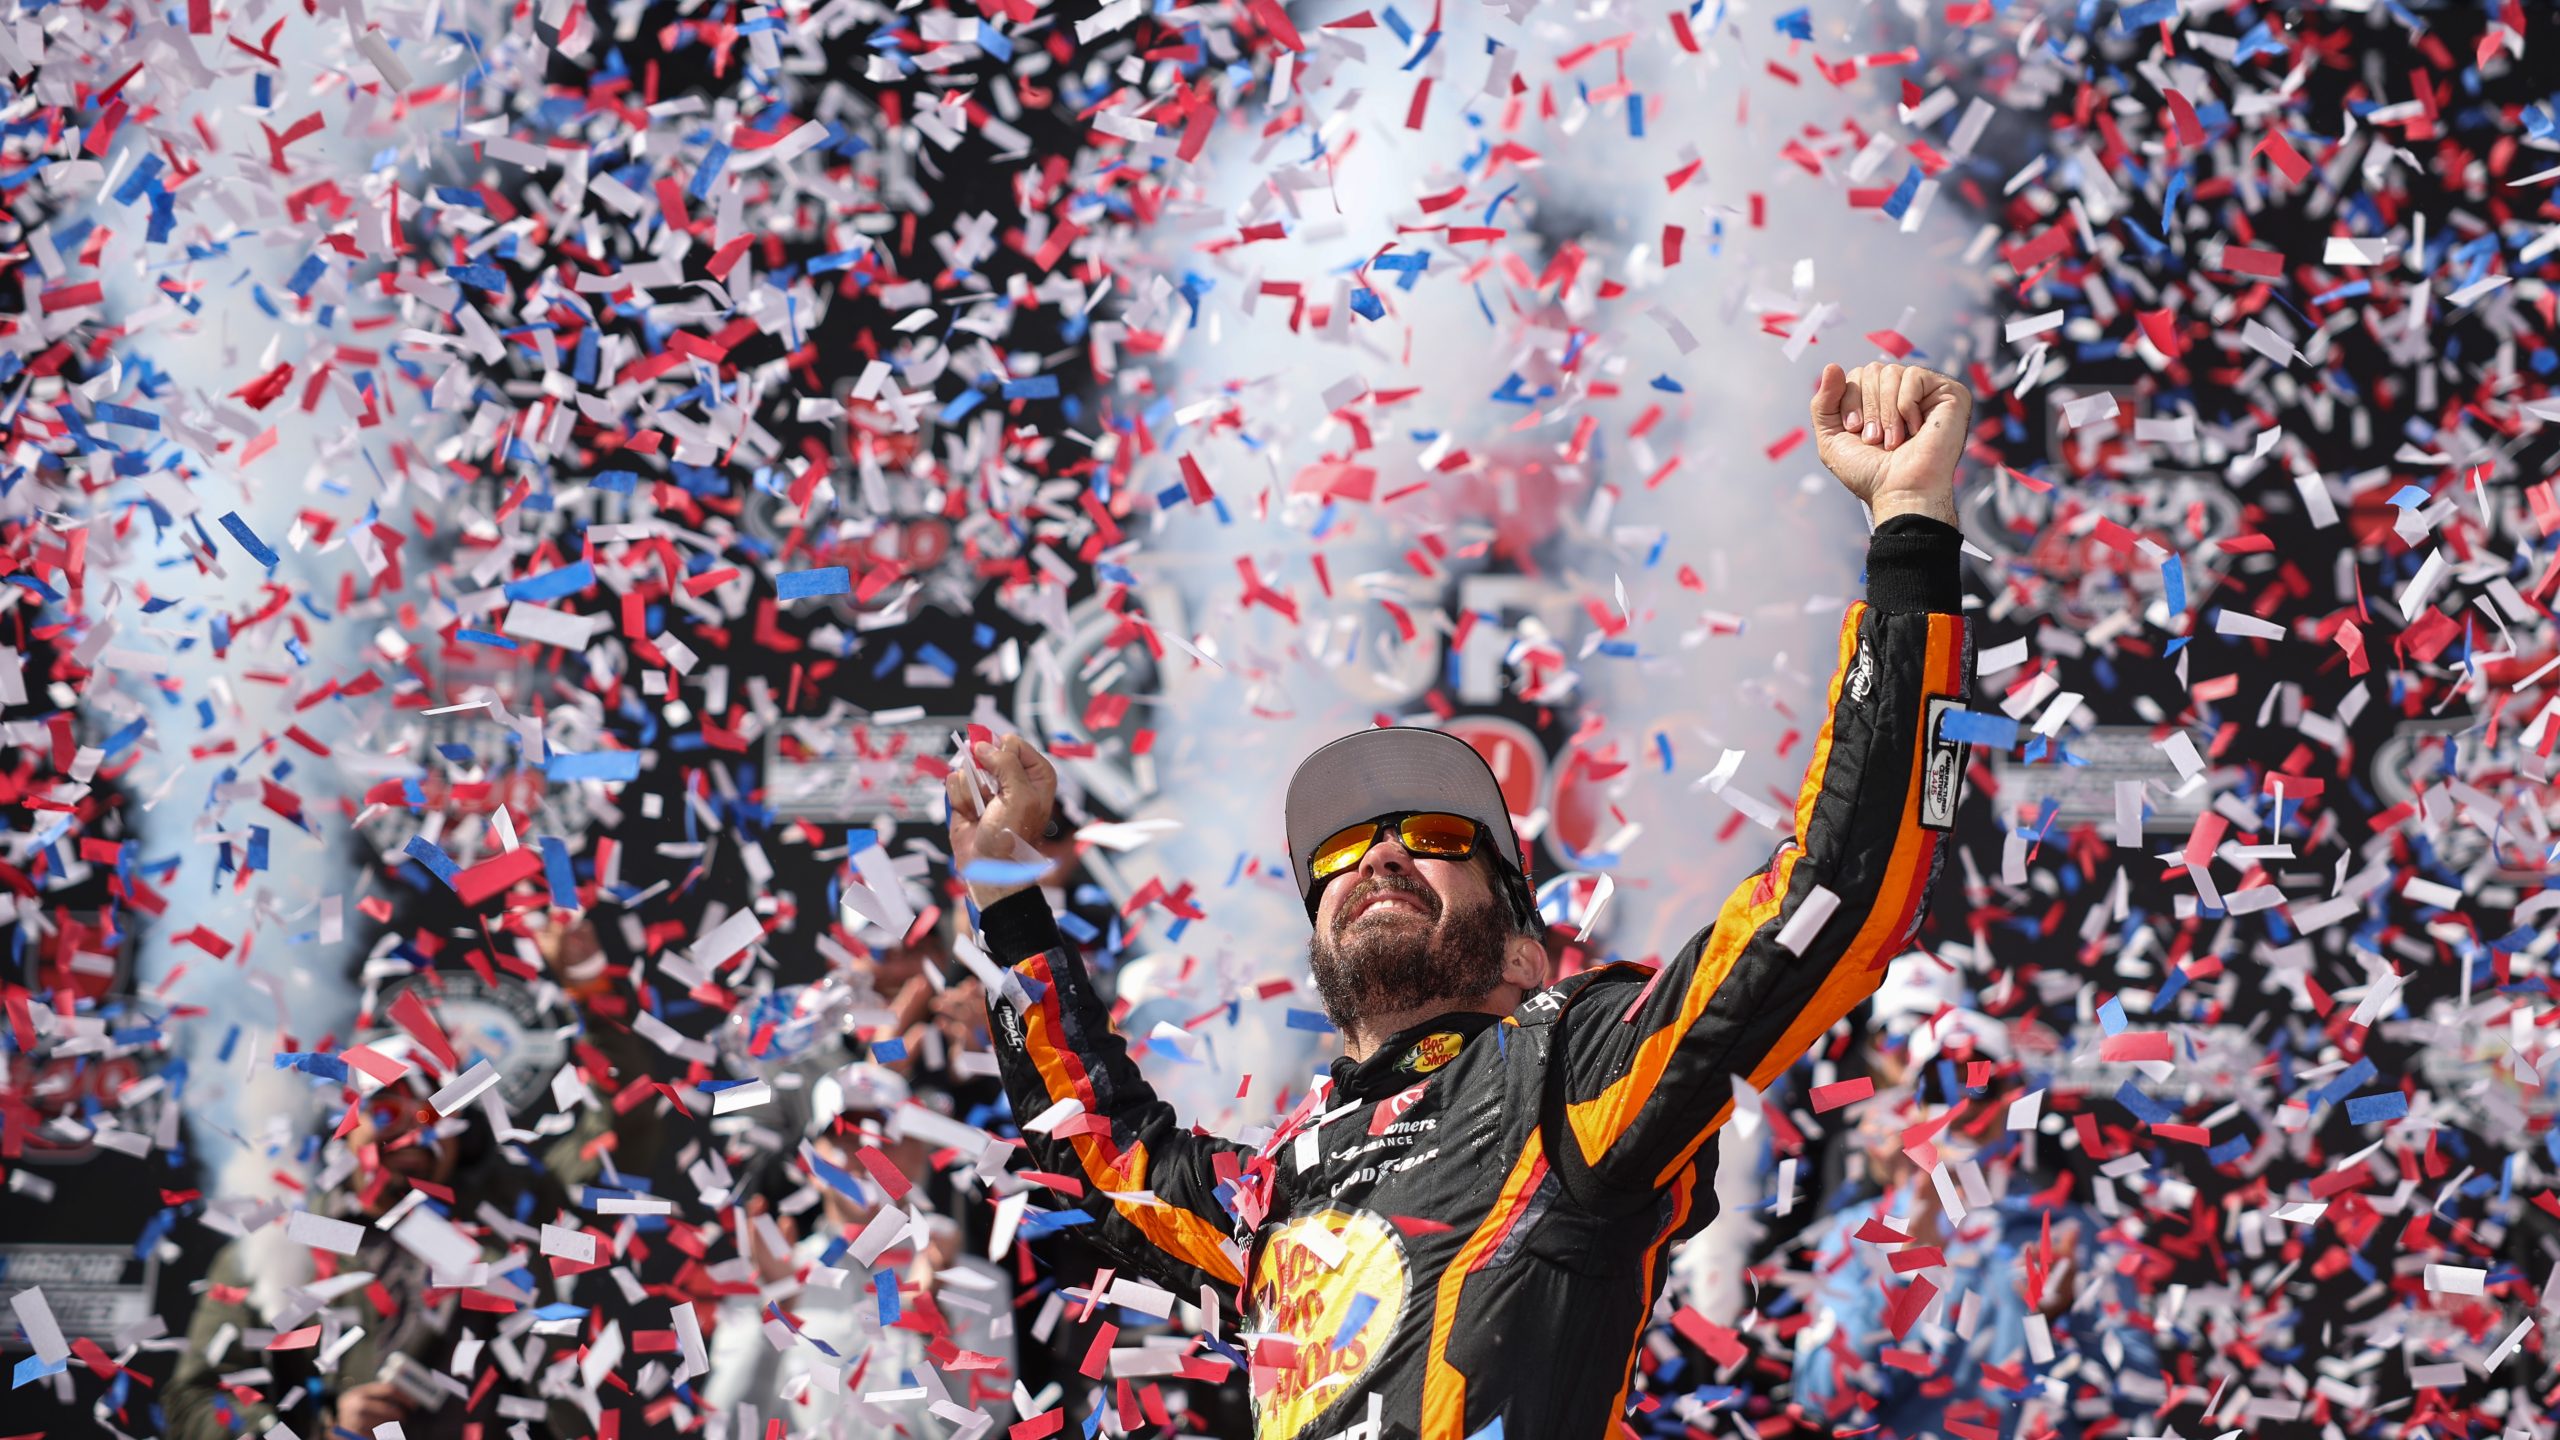 Credit: DOVER, DELAWARE - MAY 01: Martin Truex Jr., driver of the #19 Bass Pro Shops Toyota, celebrates in victory lane after winning the NASCAR Cup Series Würth 400 at Dover International Speedway on May 01, 2023 in Dover, Delaware. (Photo by James Gilbert/Getty Images)